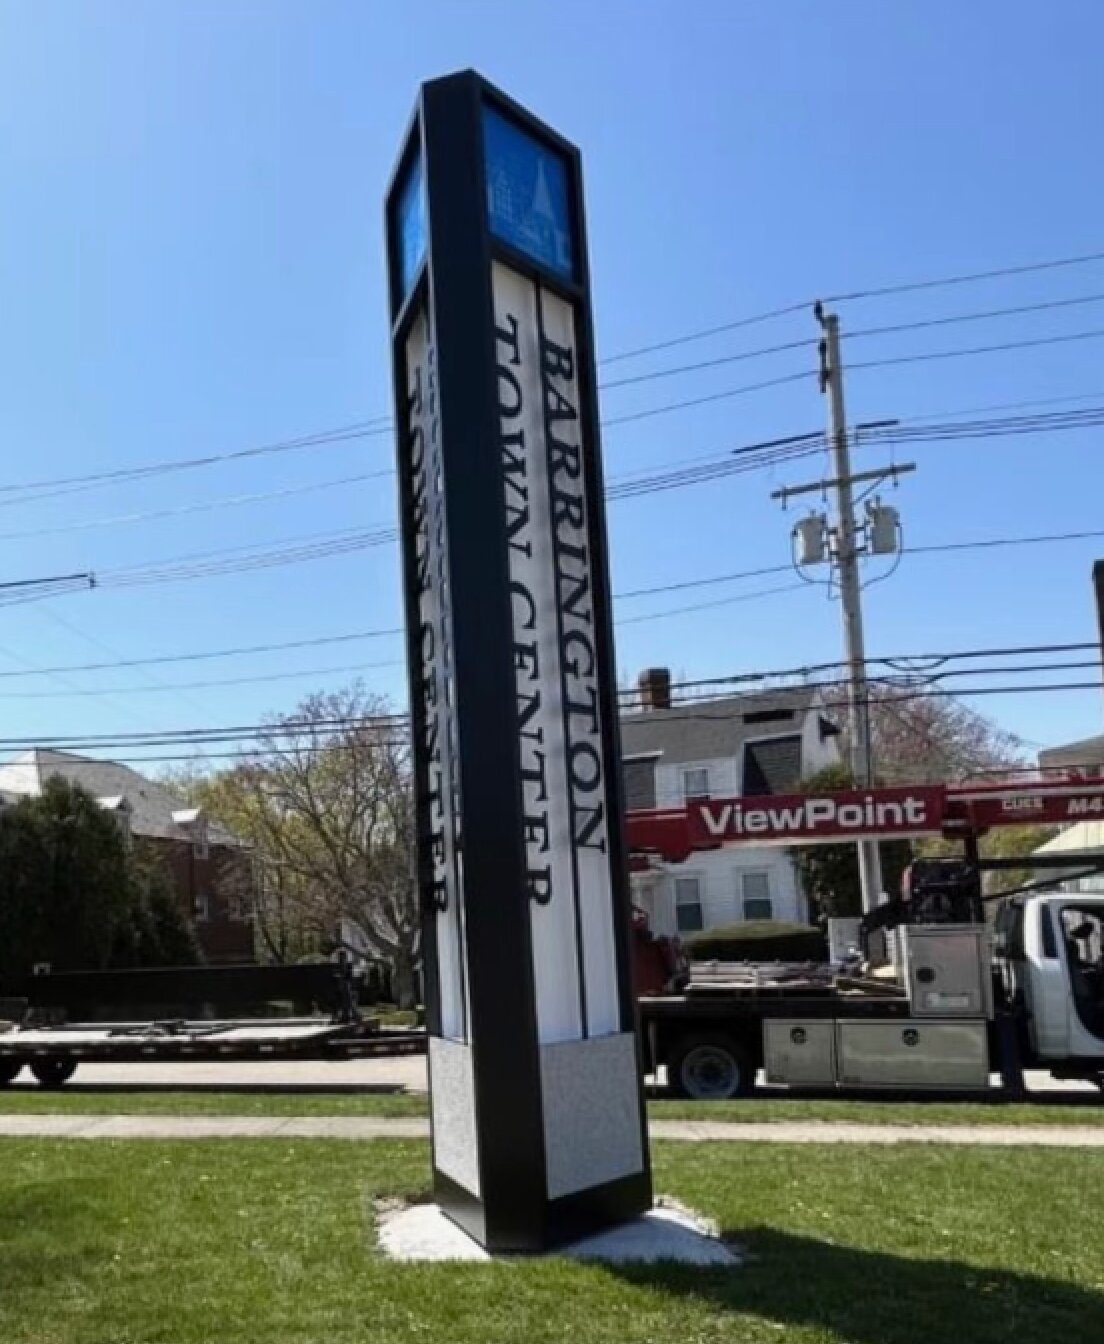 Vertical monument signs including the words “Barrington Town Center” were installed in two locations along County Road recently.